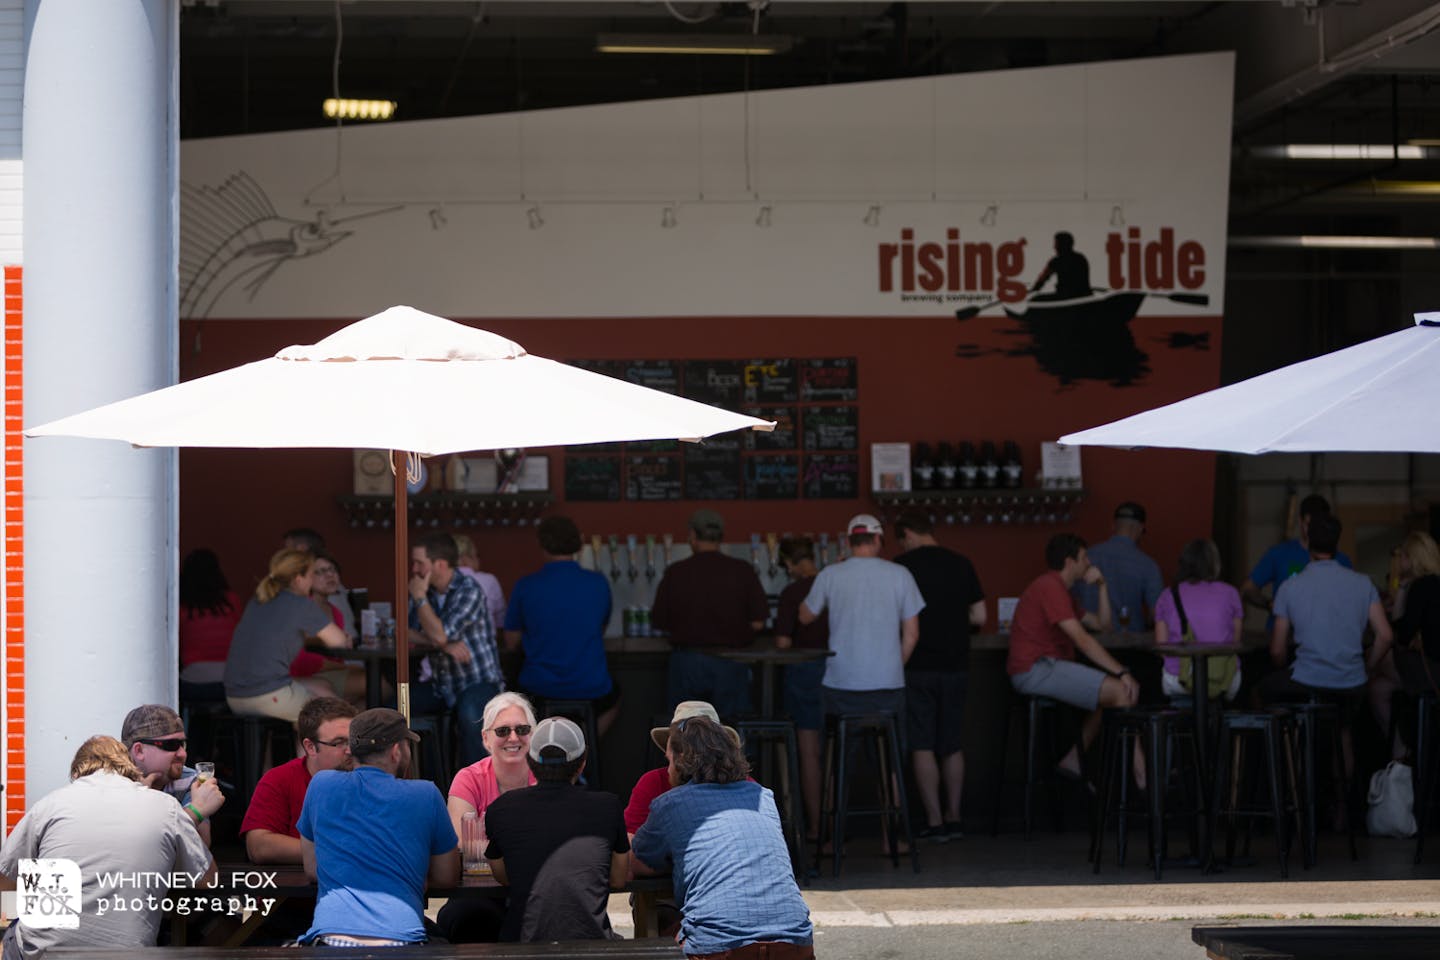 Rising Tide Brewing Company spring photo shoot at the tasting room on Fox Street in Portland's East Bayside neighborhood.  The artisanal craft brewery offers beer in an airy tasting room, plus live music, food trucks & tours.  According to the Maine Brewe